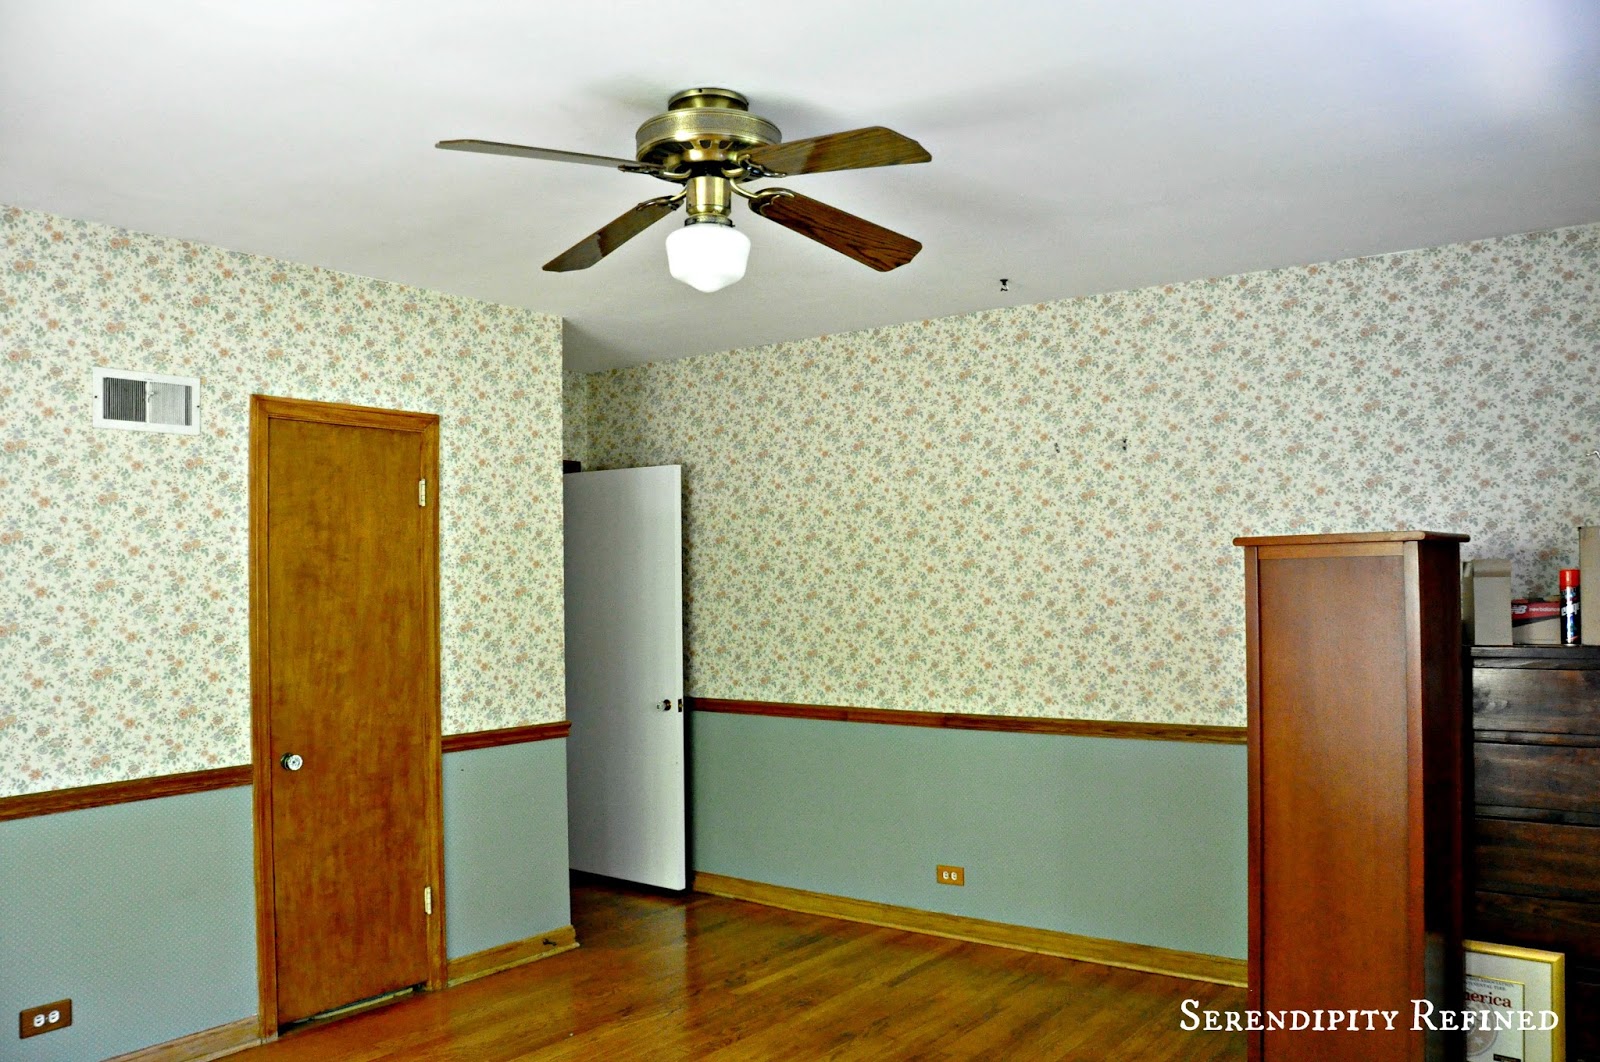 Stripping Wallpaper And The Winners Of Giveaway